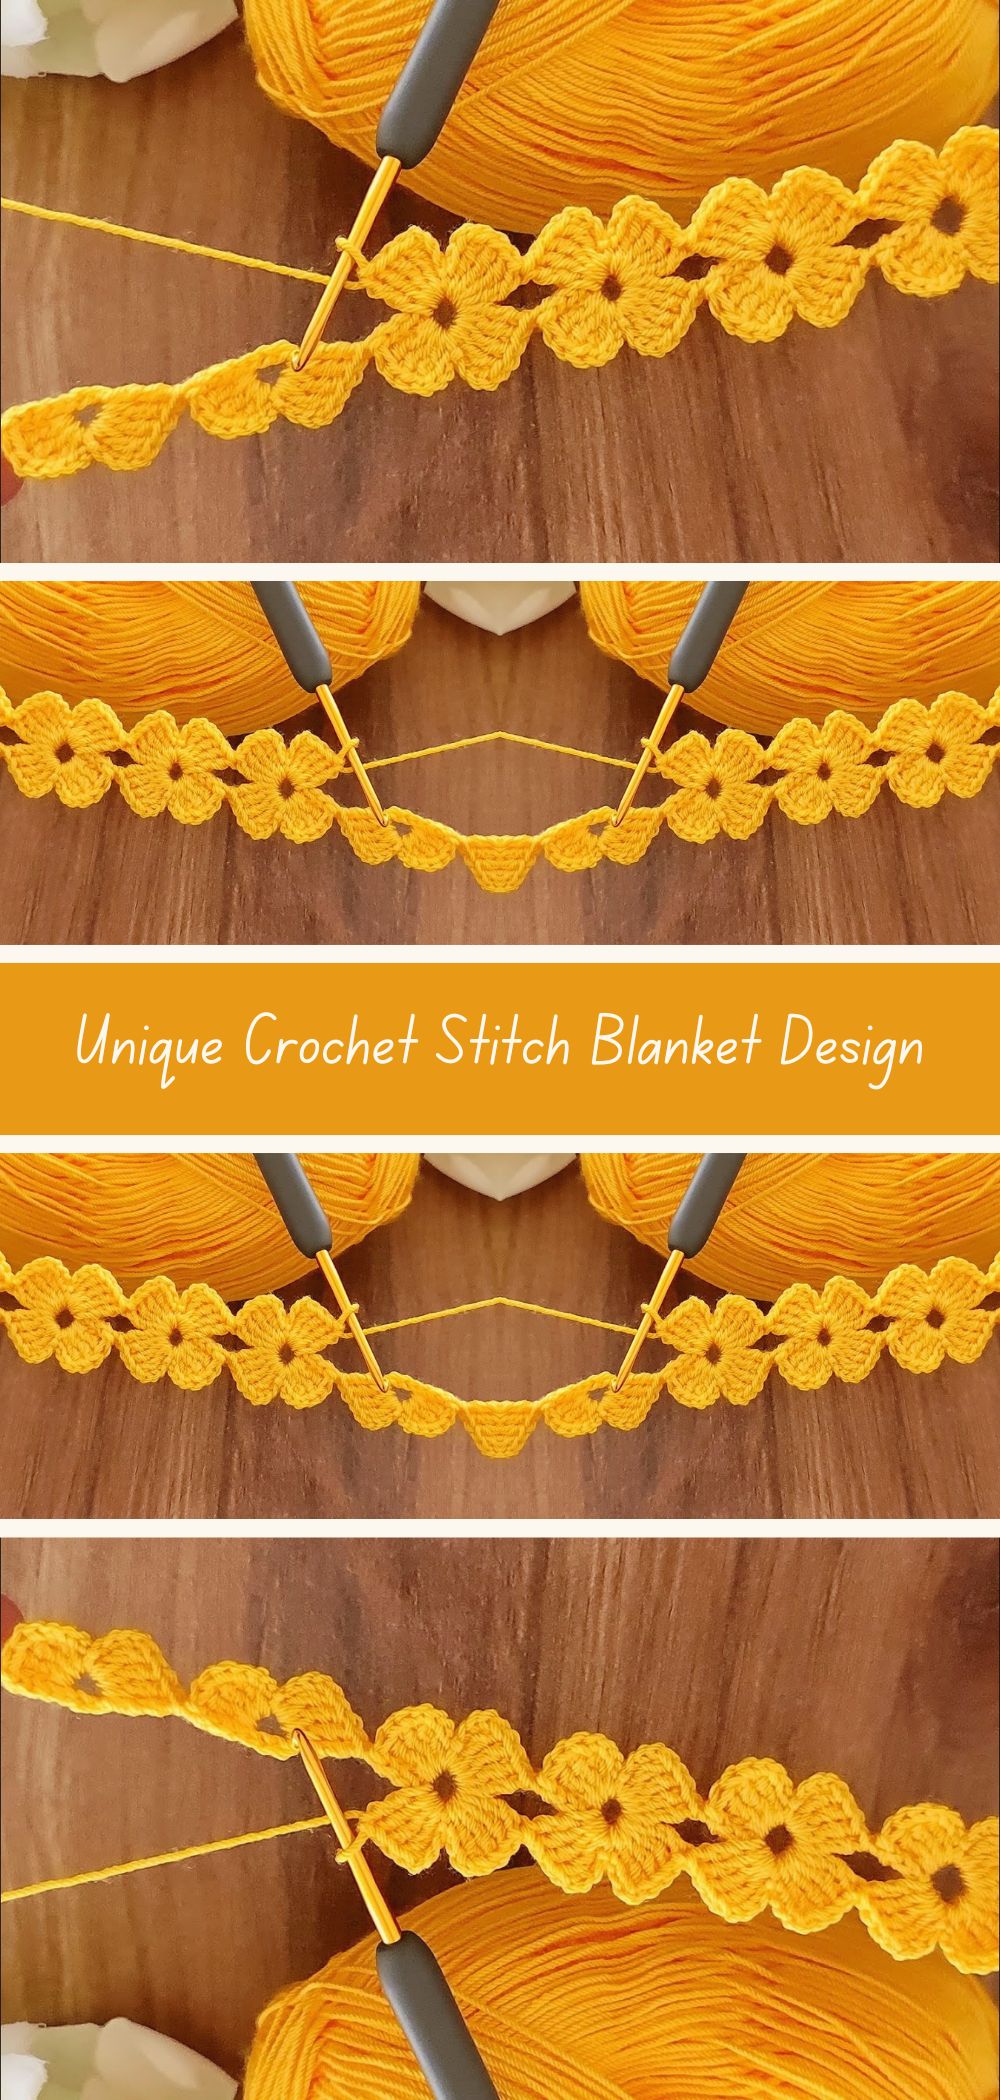 Original Crochet Stitch Blanket Pattern - Express your creativity with this unique and inspiring crochet pattern for a stunning blanket